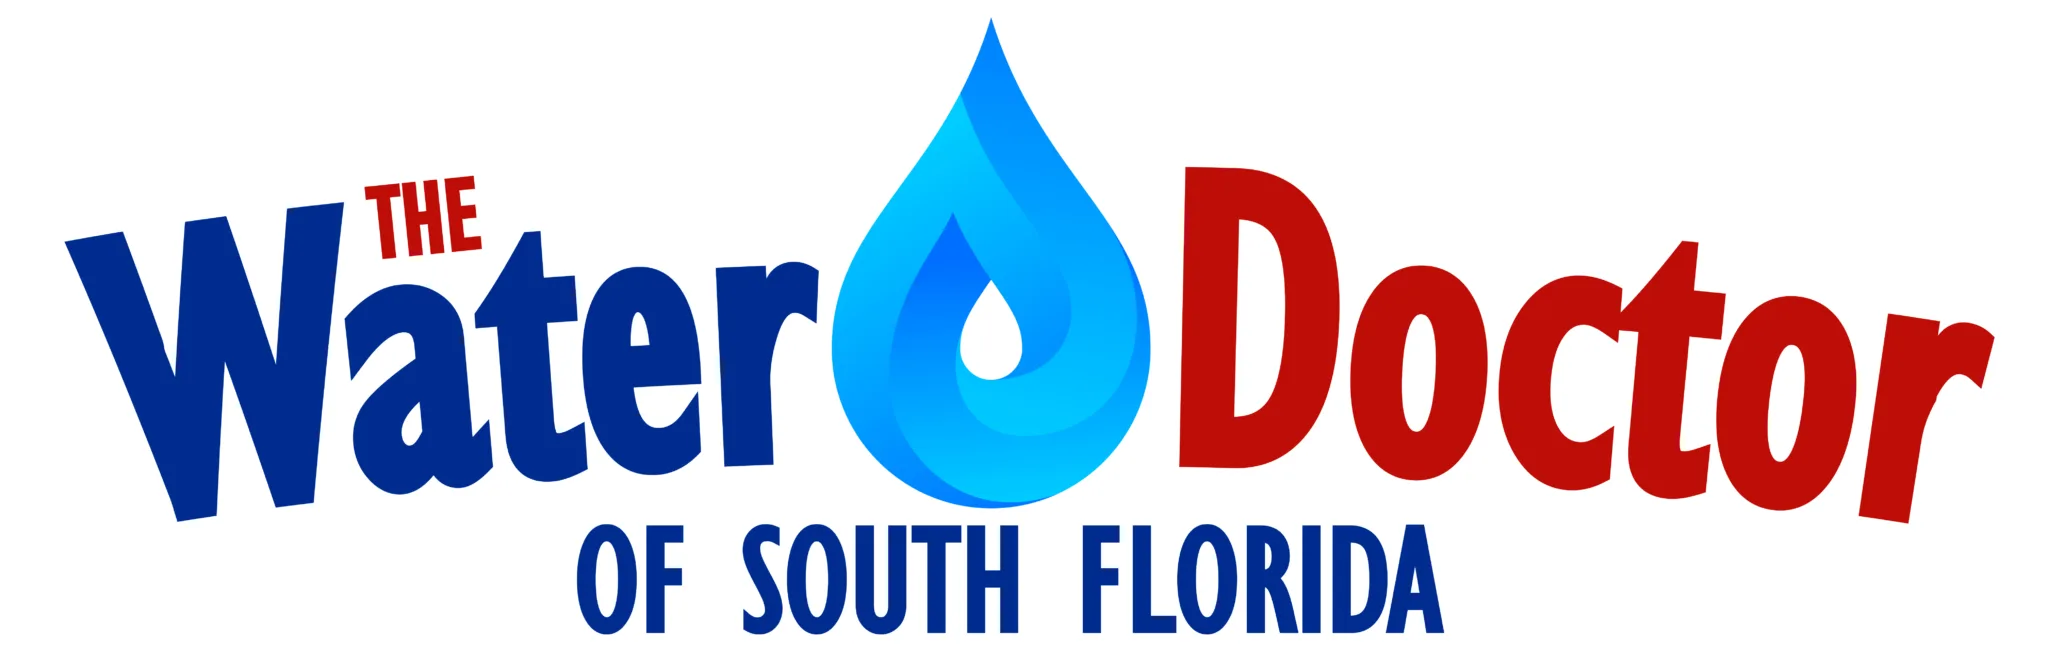 The Water Doctor of South Florida